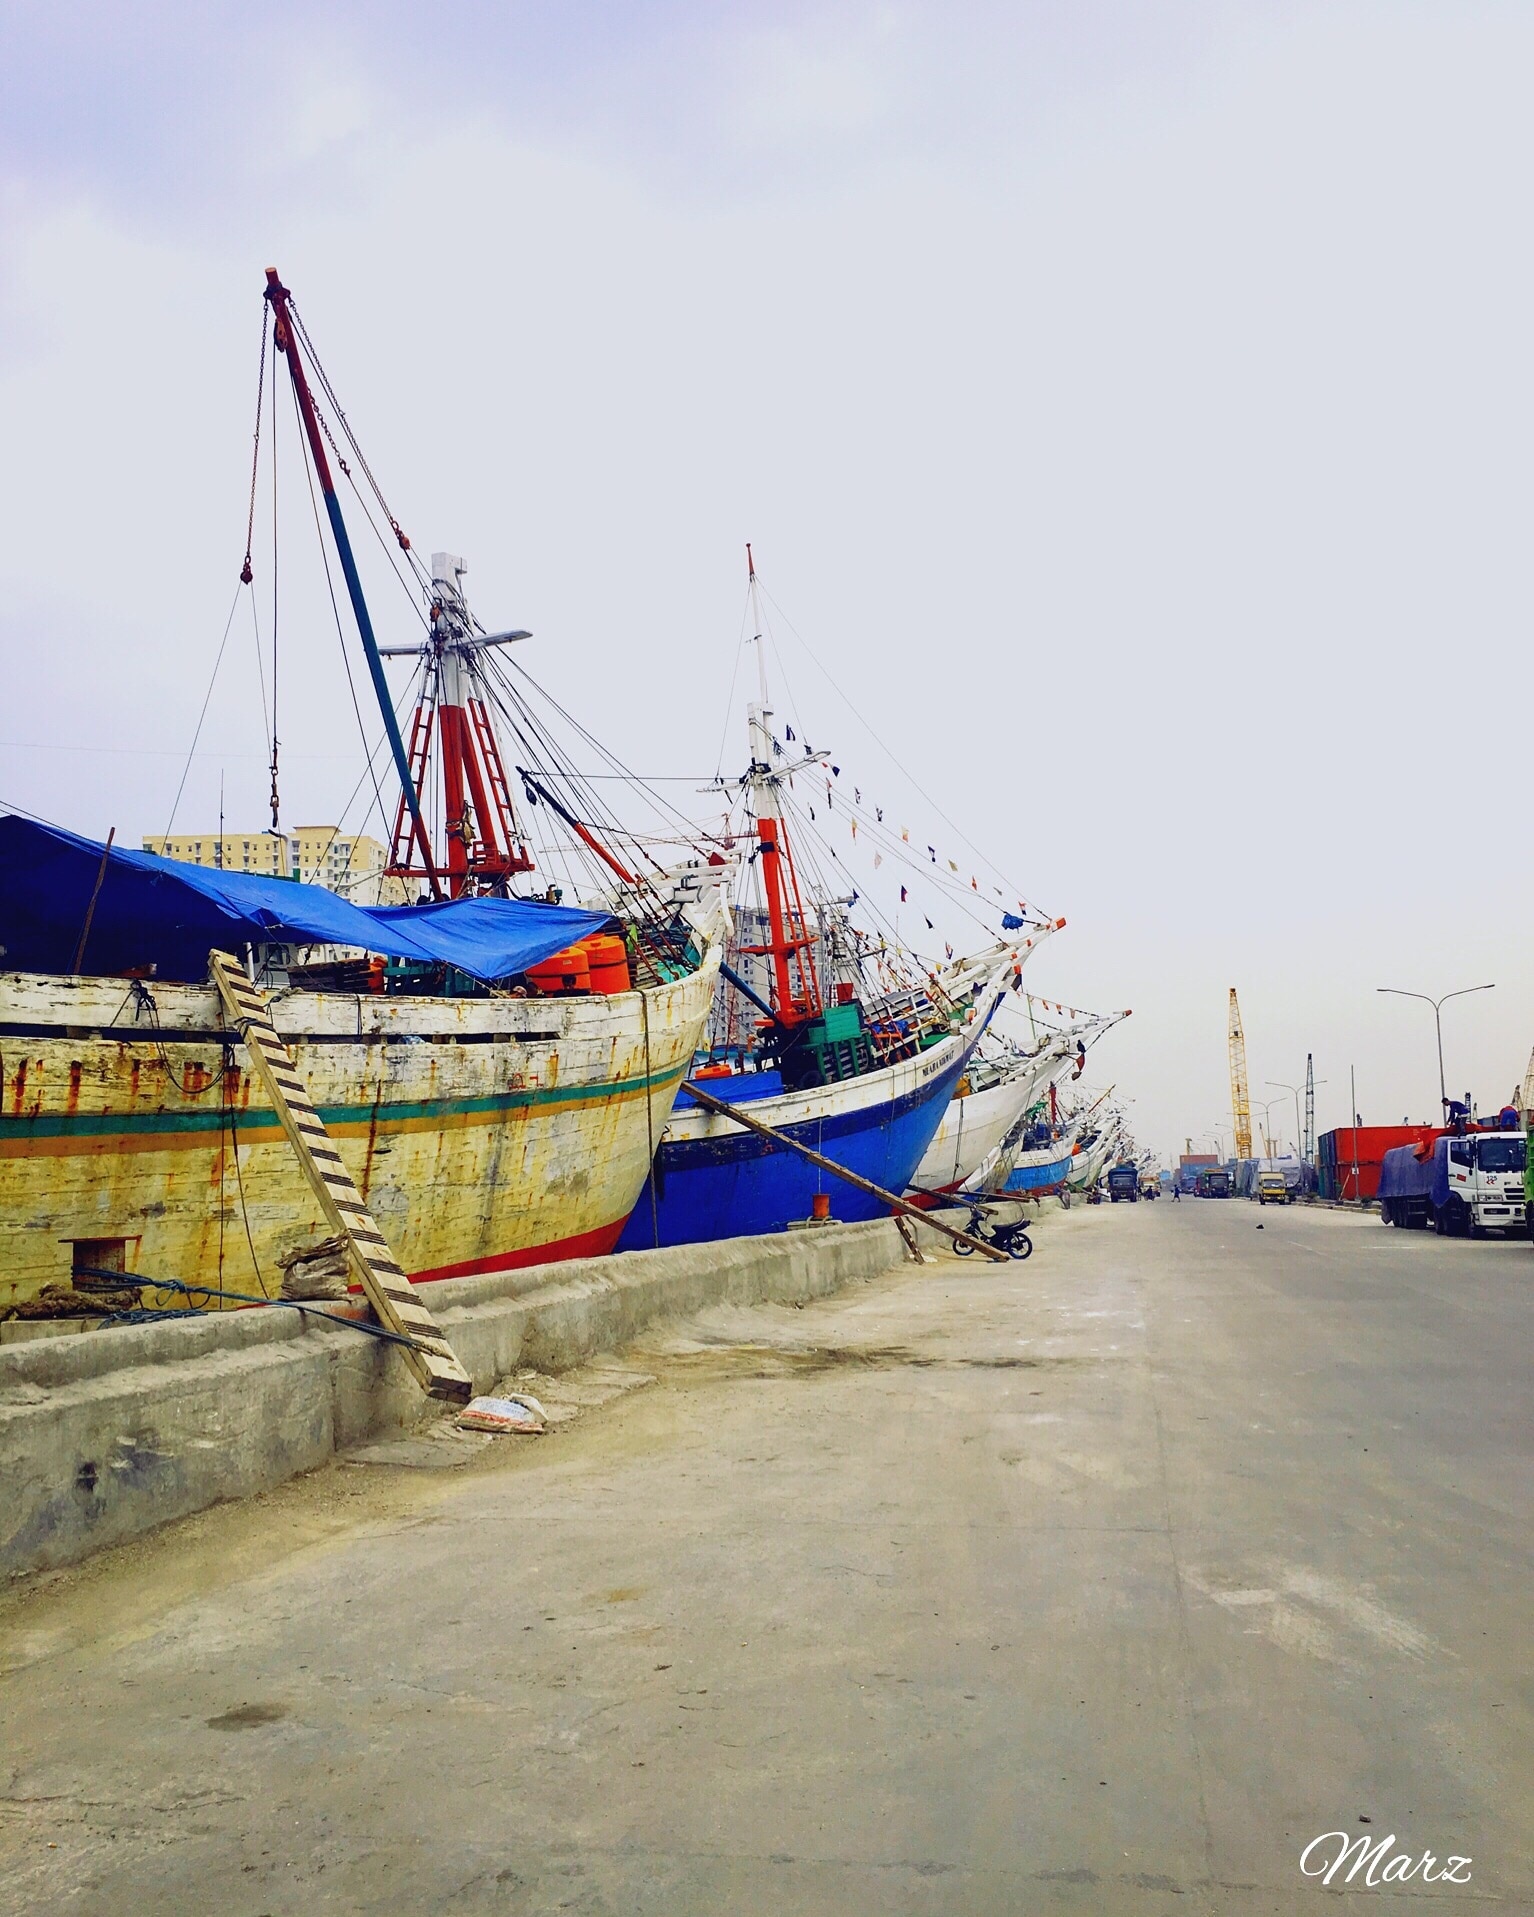 No permanence is ours. We are a wave that flows to fit whatever it finds. #sundakelapa #oldharbour #jakarta 🇮🇩